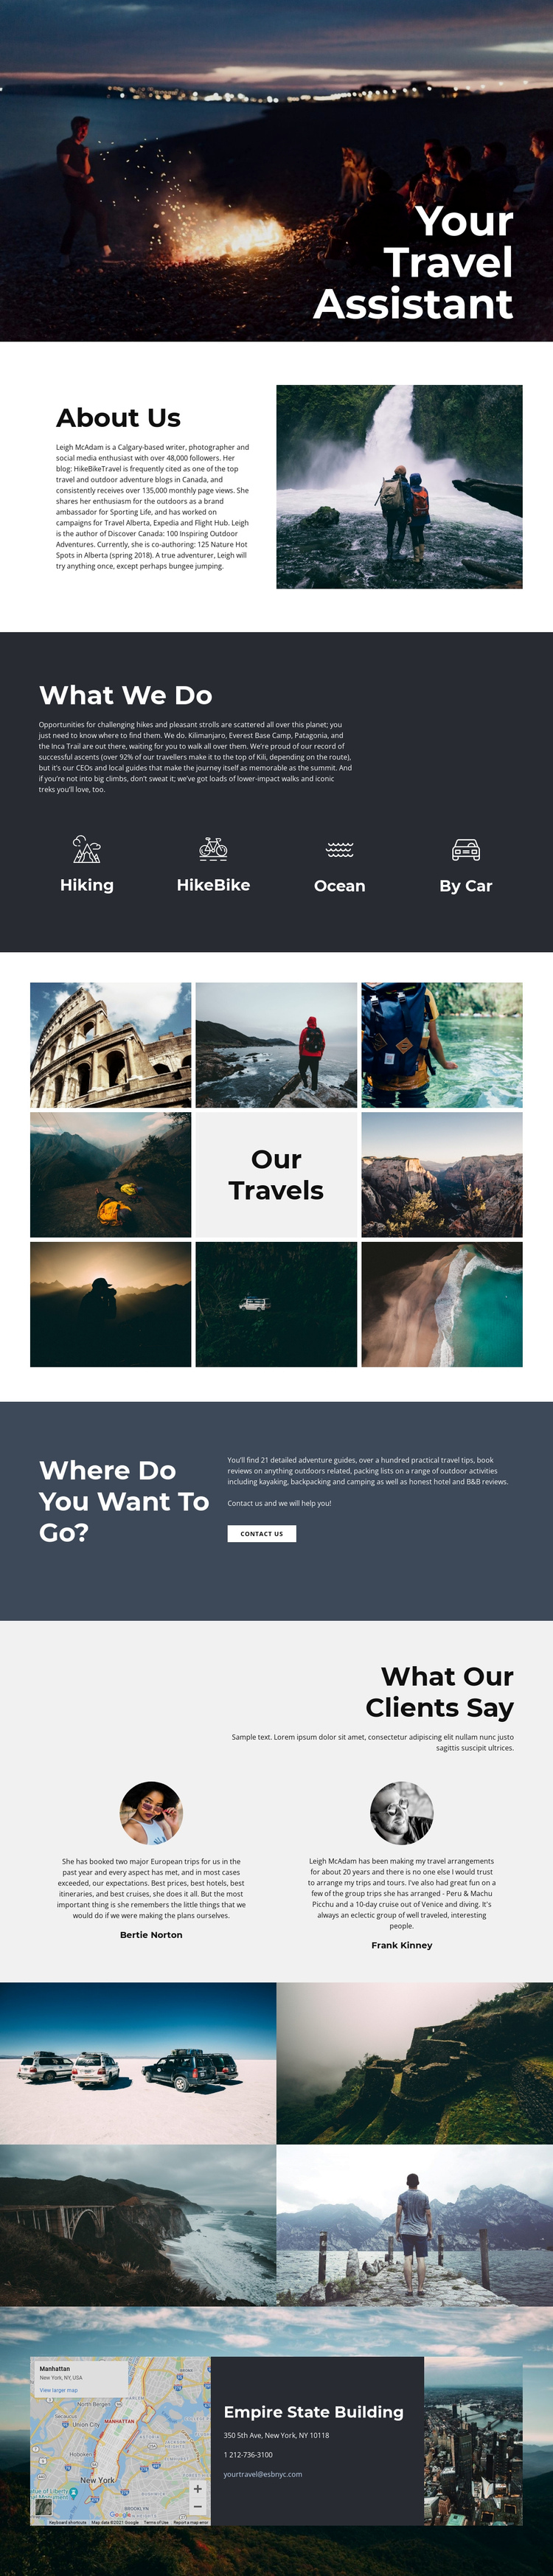 Travel Assistant One Page Template